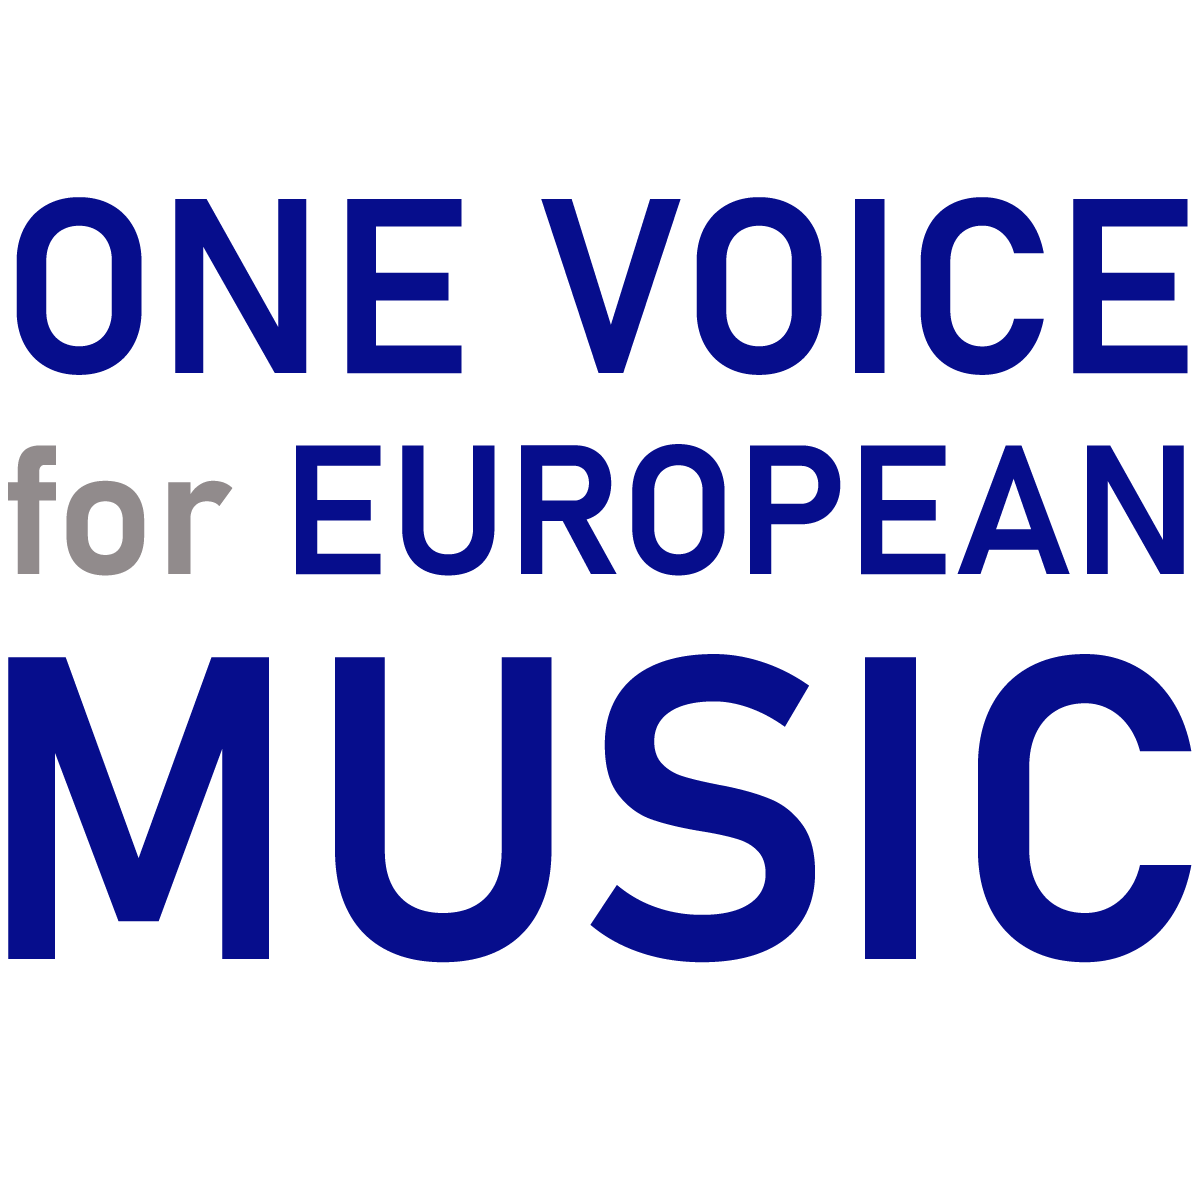 One voice for european music